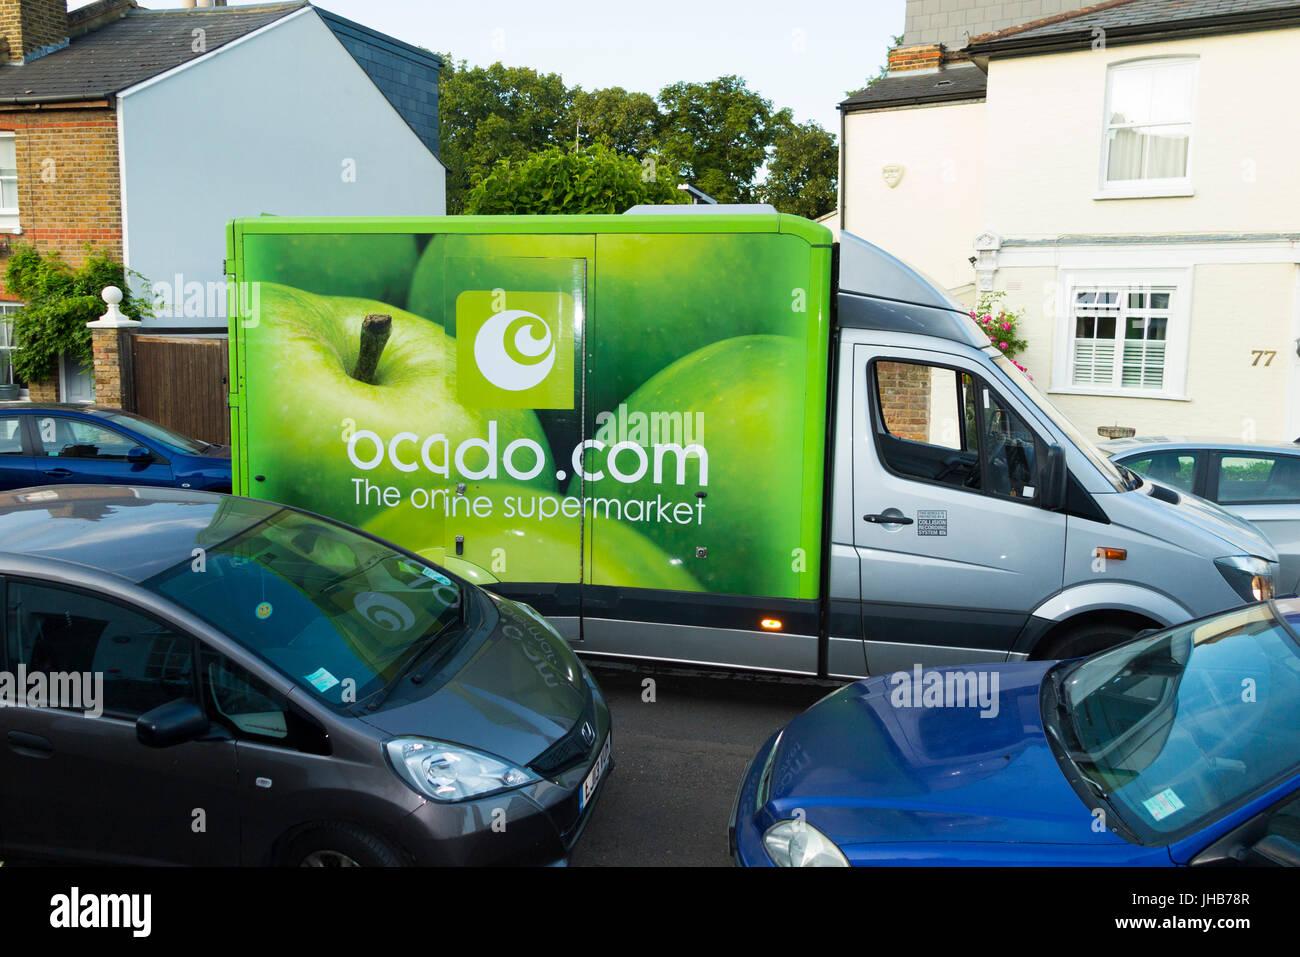 Ocado / Ocado.com supermarket / super market delivery van in a residential street or road making home delivery & blocking the flow of traffic. UK Stock Photo